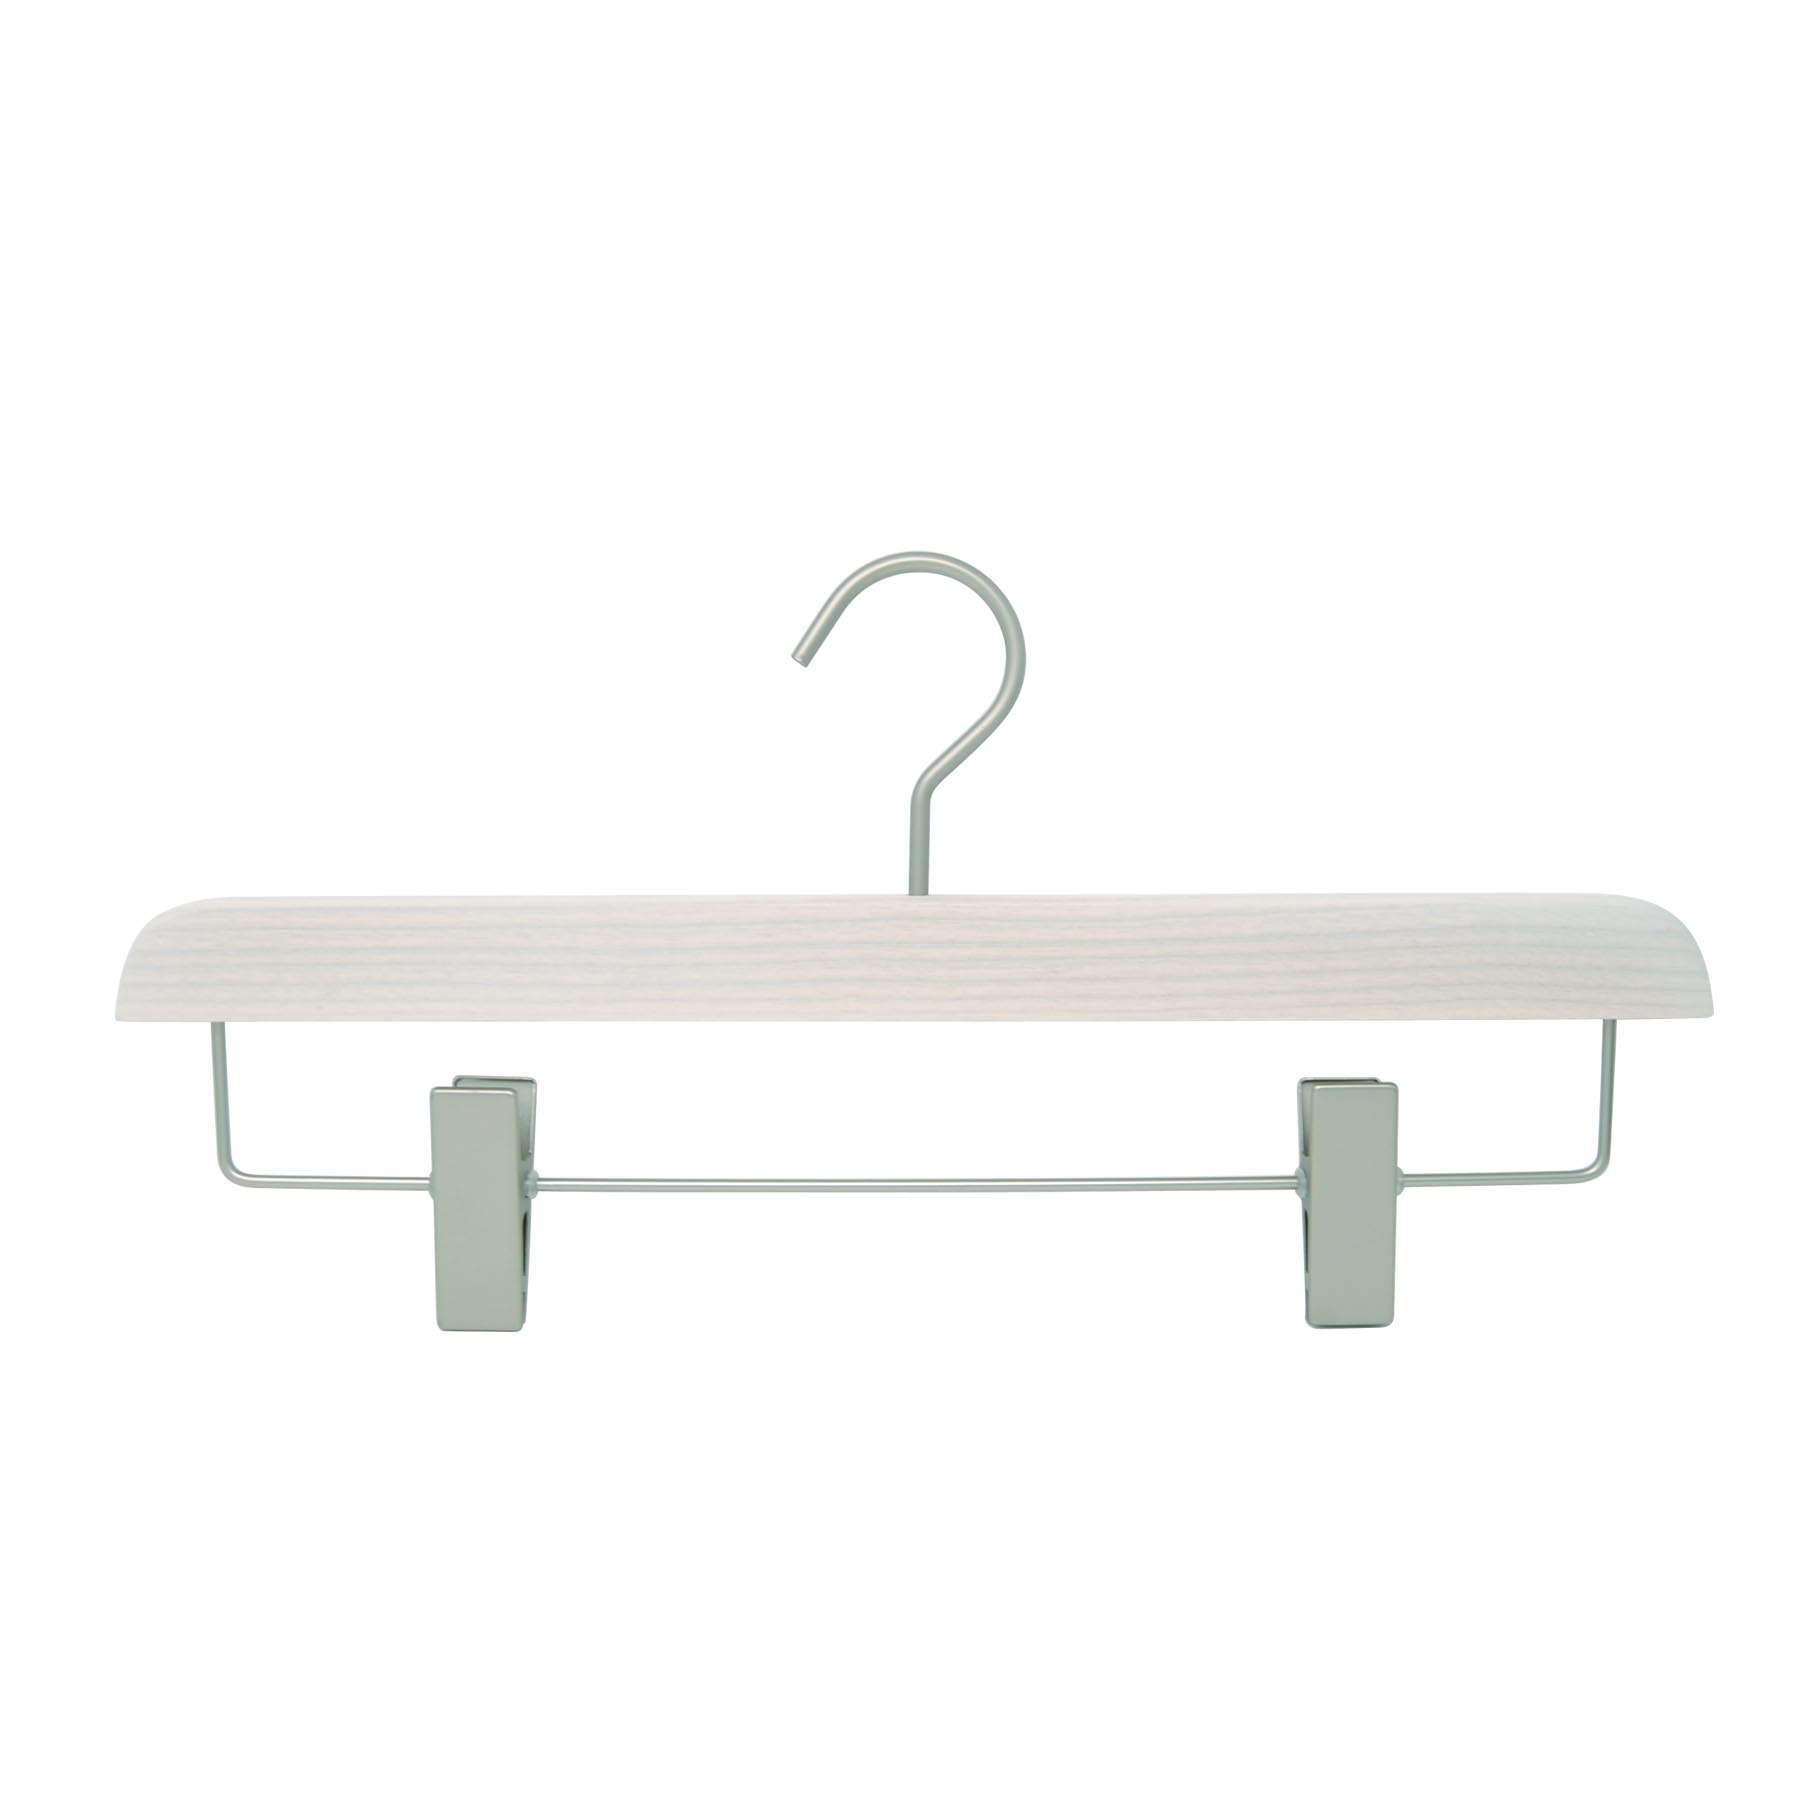 ABbuy Italian Design Rounded Deluxe Wooden Hanger with Adjustable Cushion  Clips for PantTrouser and Skirt 